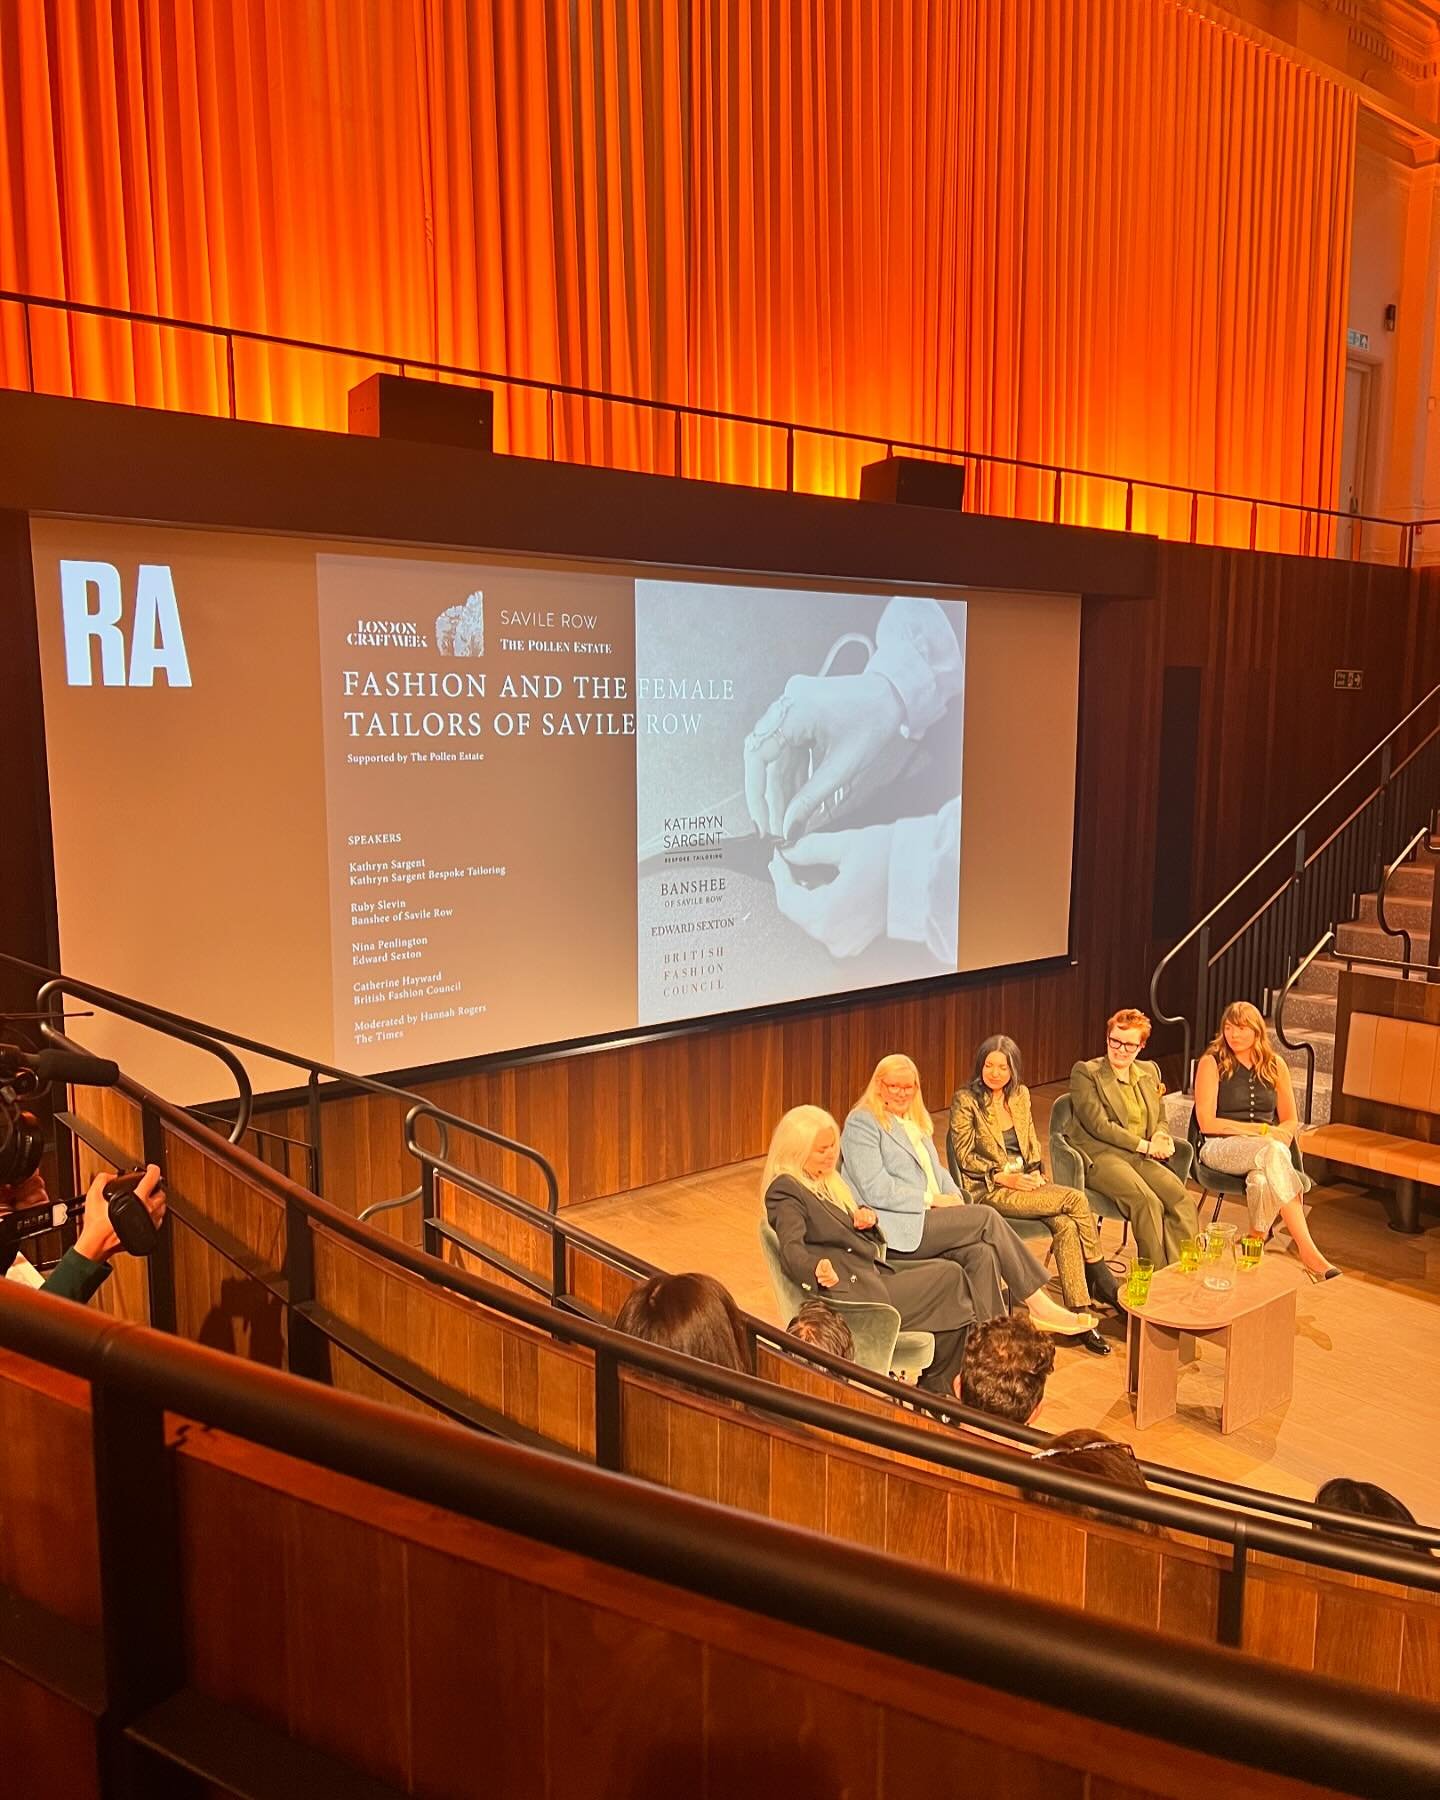 I went to a great talk last week with @mpbusinessstyling at the @royalacademyarts during @londoncraftweek with inspiring conversations by talented women Tailors and designers of Savile Row.
.
Inspiring talk from  Kathryn @kathrynsargentbespoke 
Ruby 